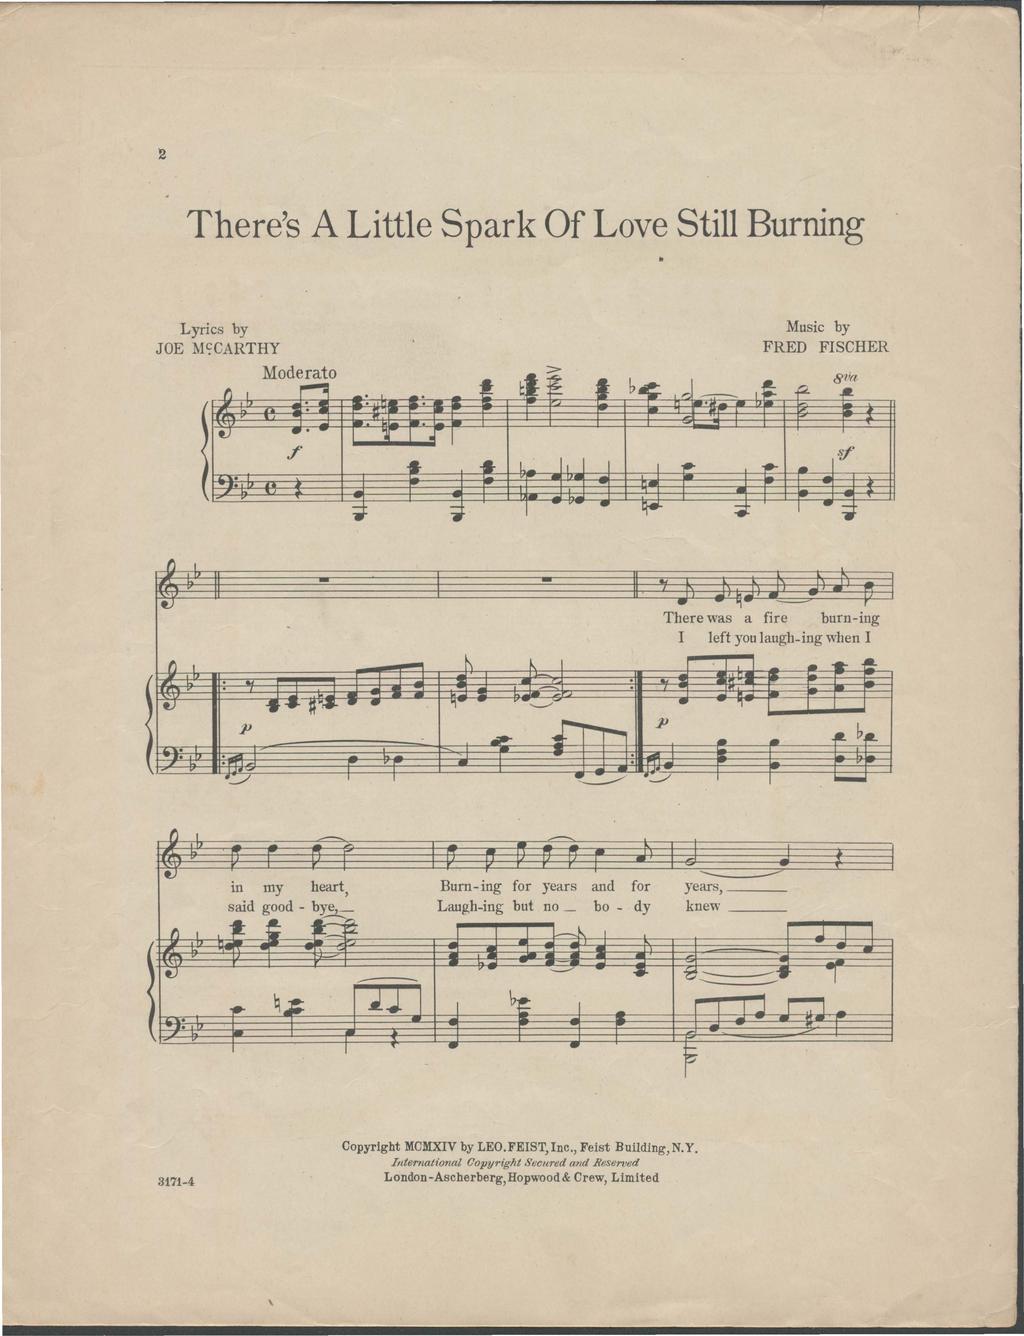 2 Theres A Little Spark Of Love Still Burning t Lyrics by JOE MCARTHY Music by FRED FSCHER There was a fire burning left you laughing when Burning for years and for